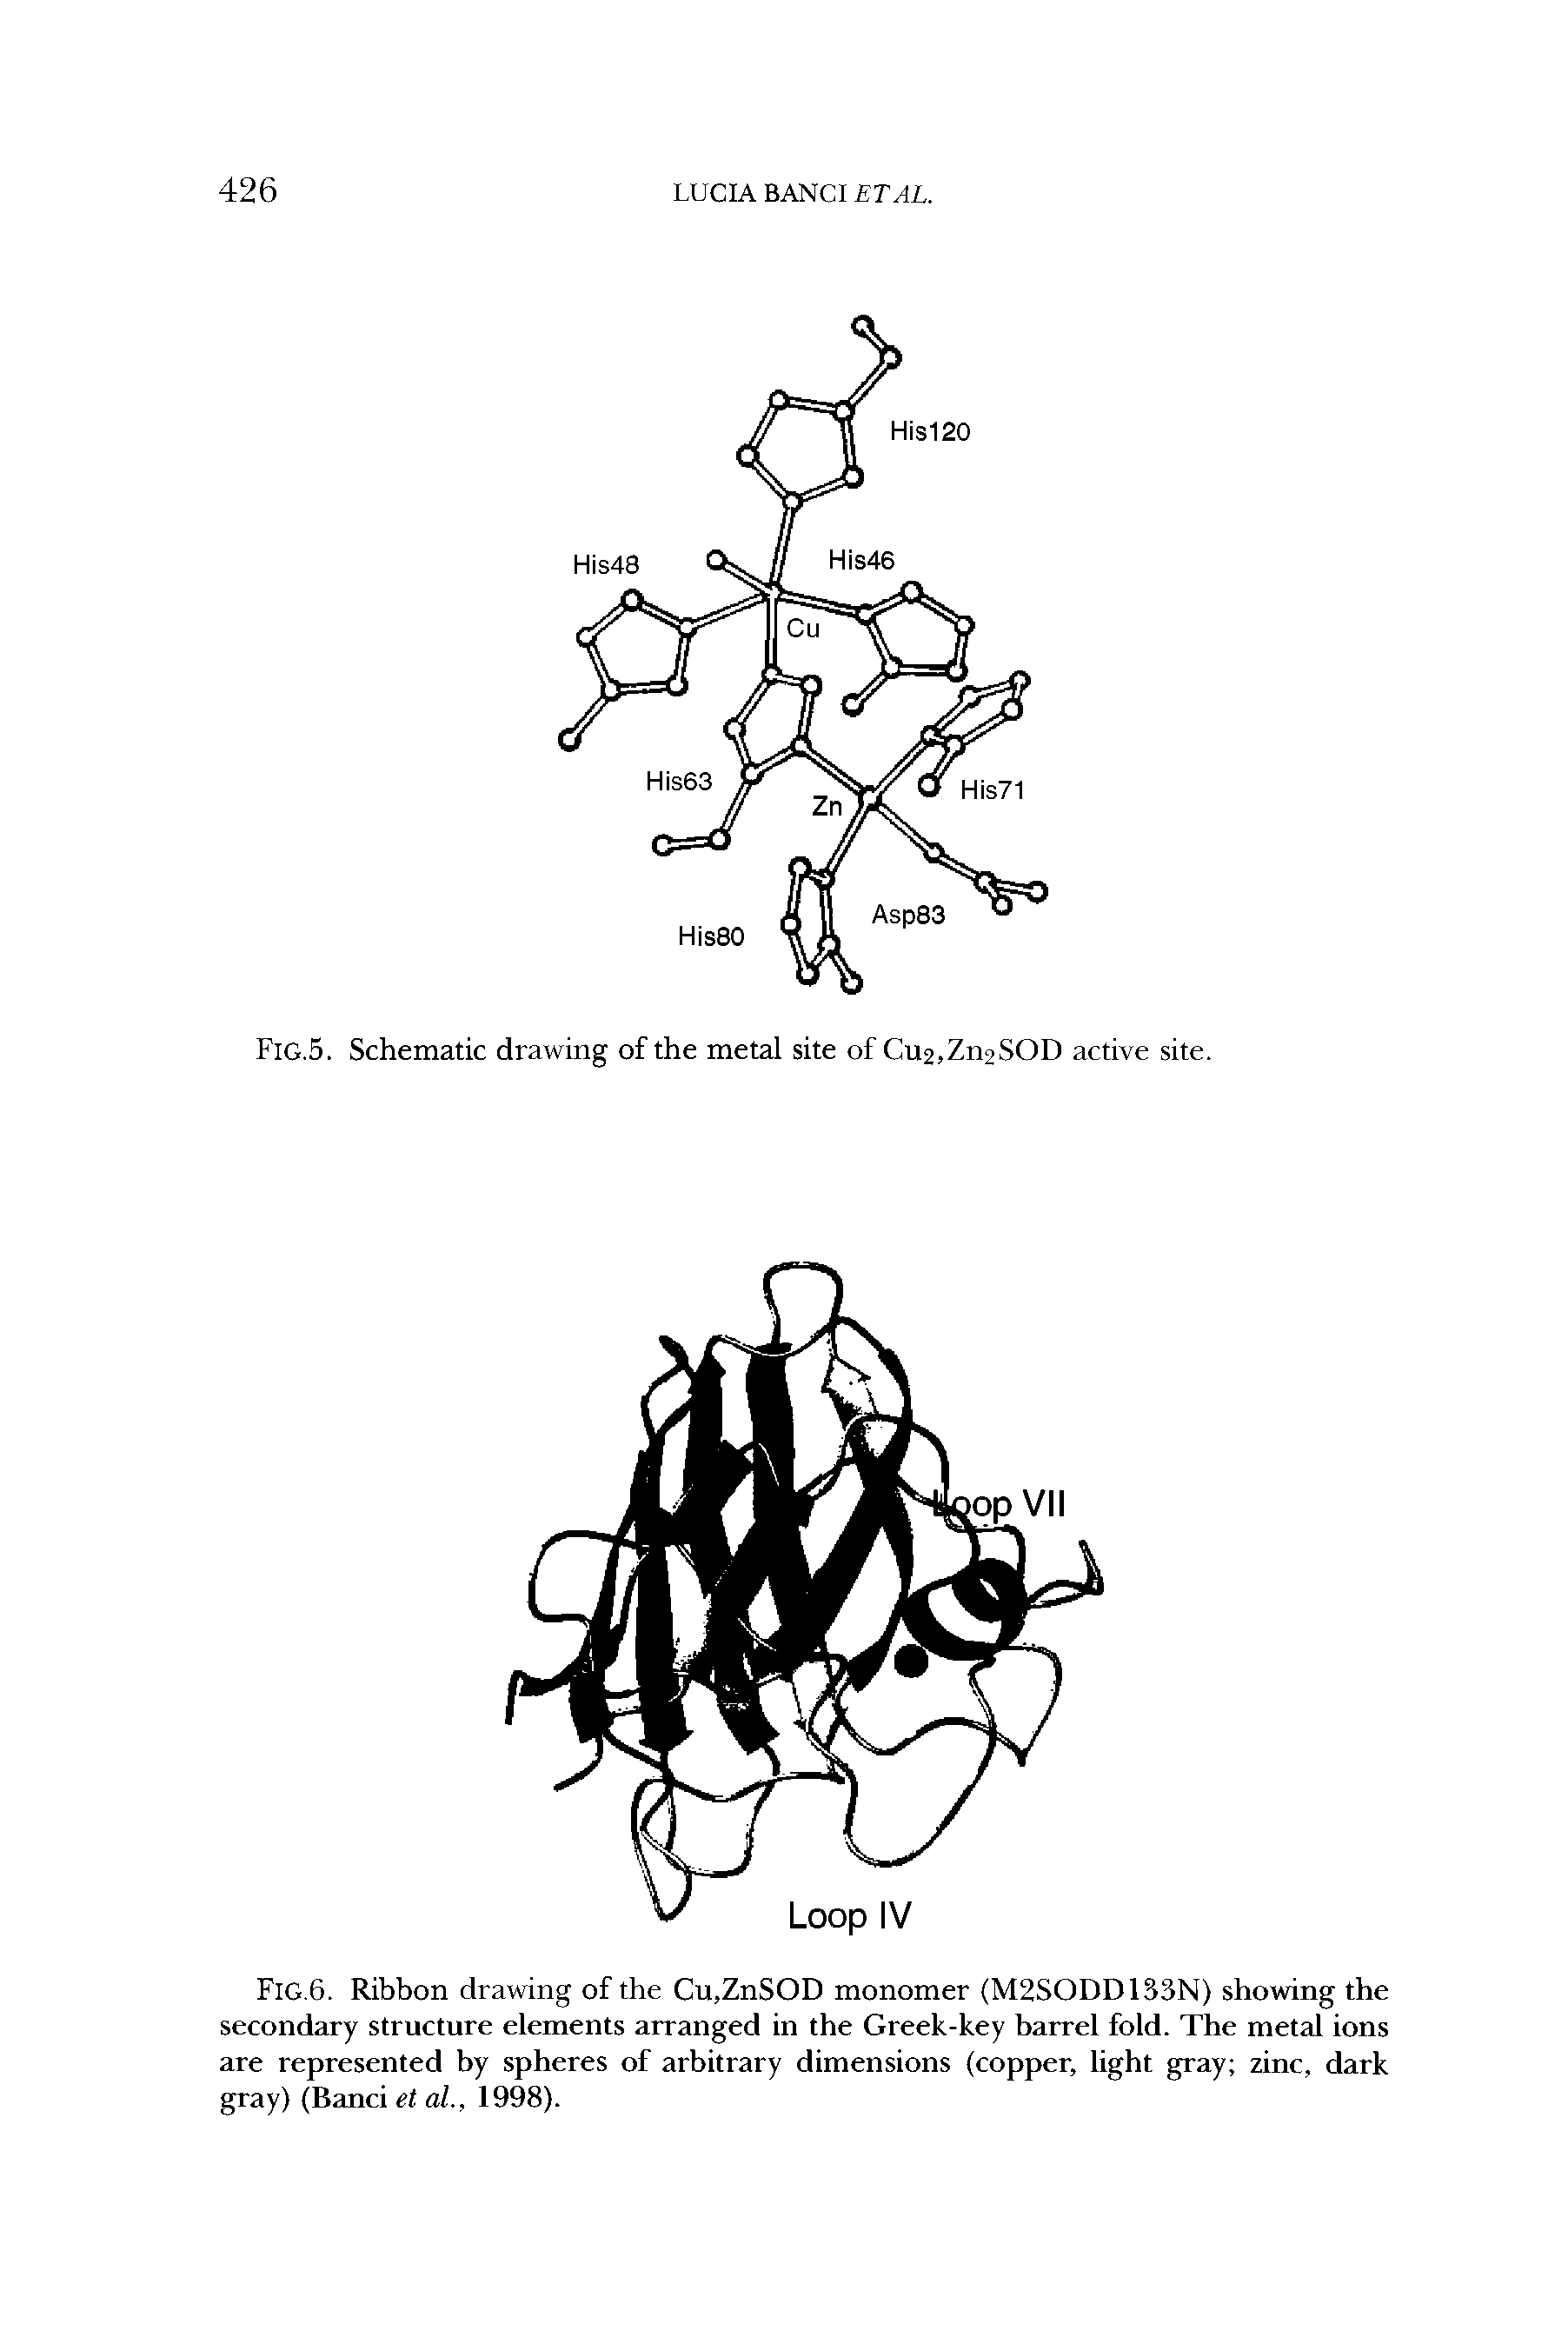 Fig.6. Ribbon drawing of the Cu.ZnSOD monomer (M2SODD183N) showing the secondary structure elements arranged in the Greek-key barrel fold. The metal ions are represented by spheres of arbitrary dimensions (copper, light gray zinc, dark gray) (Band et al., 1998).